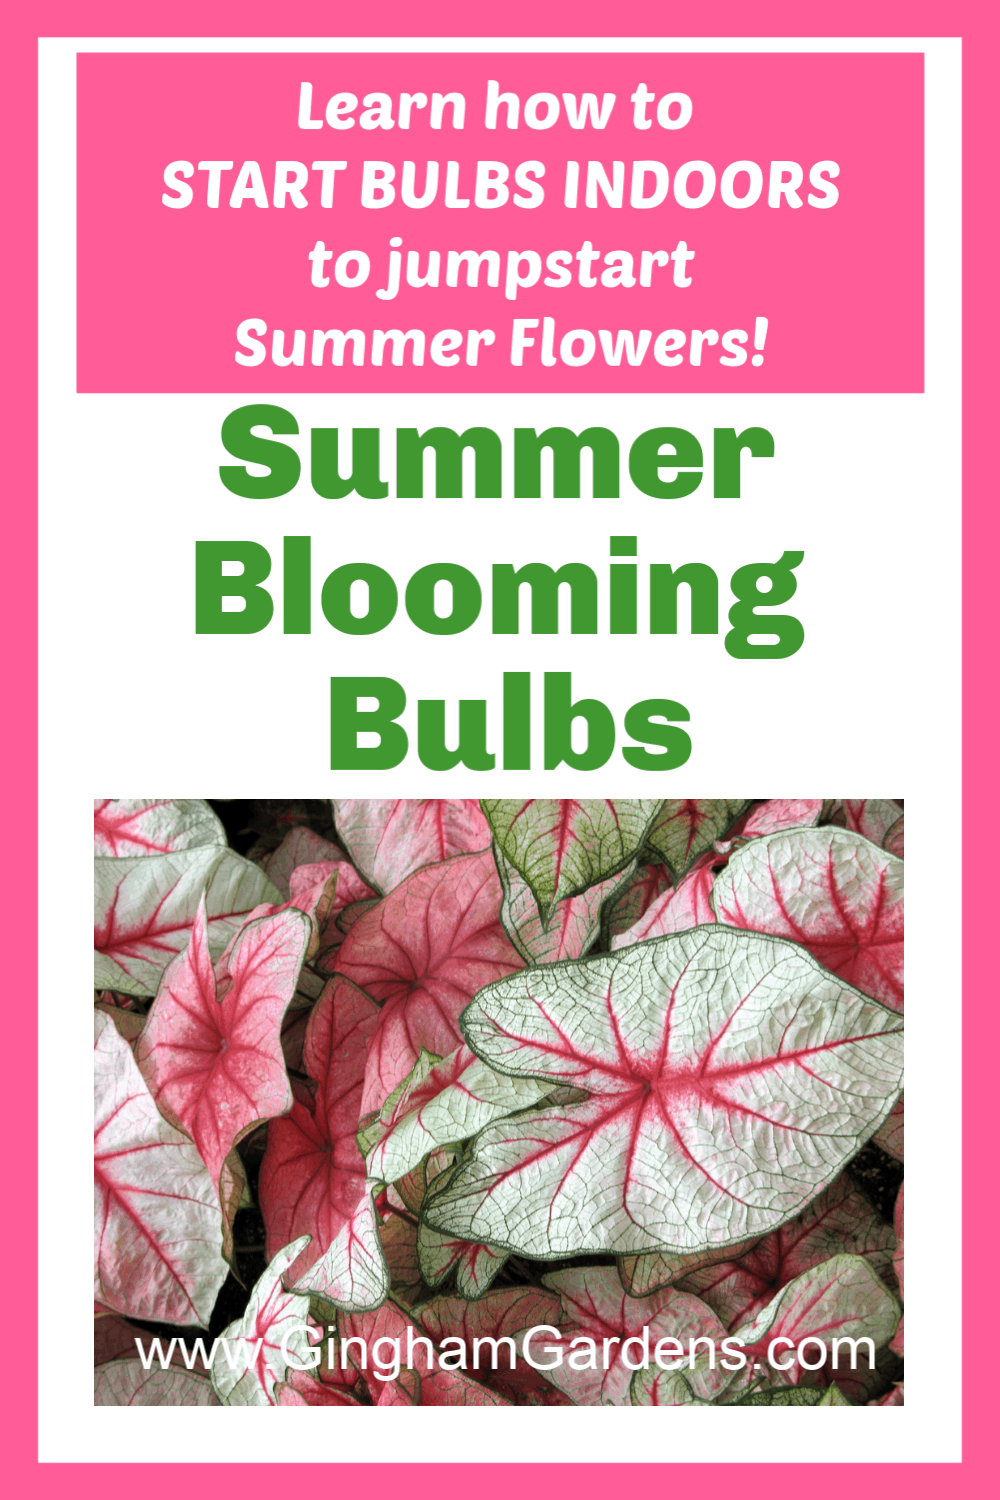 Image of Caladium Plants with Text Overlay - Summer Blooming Bulbs